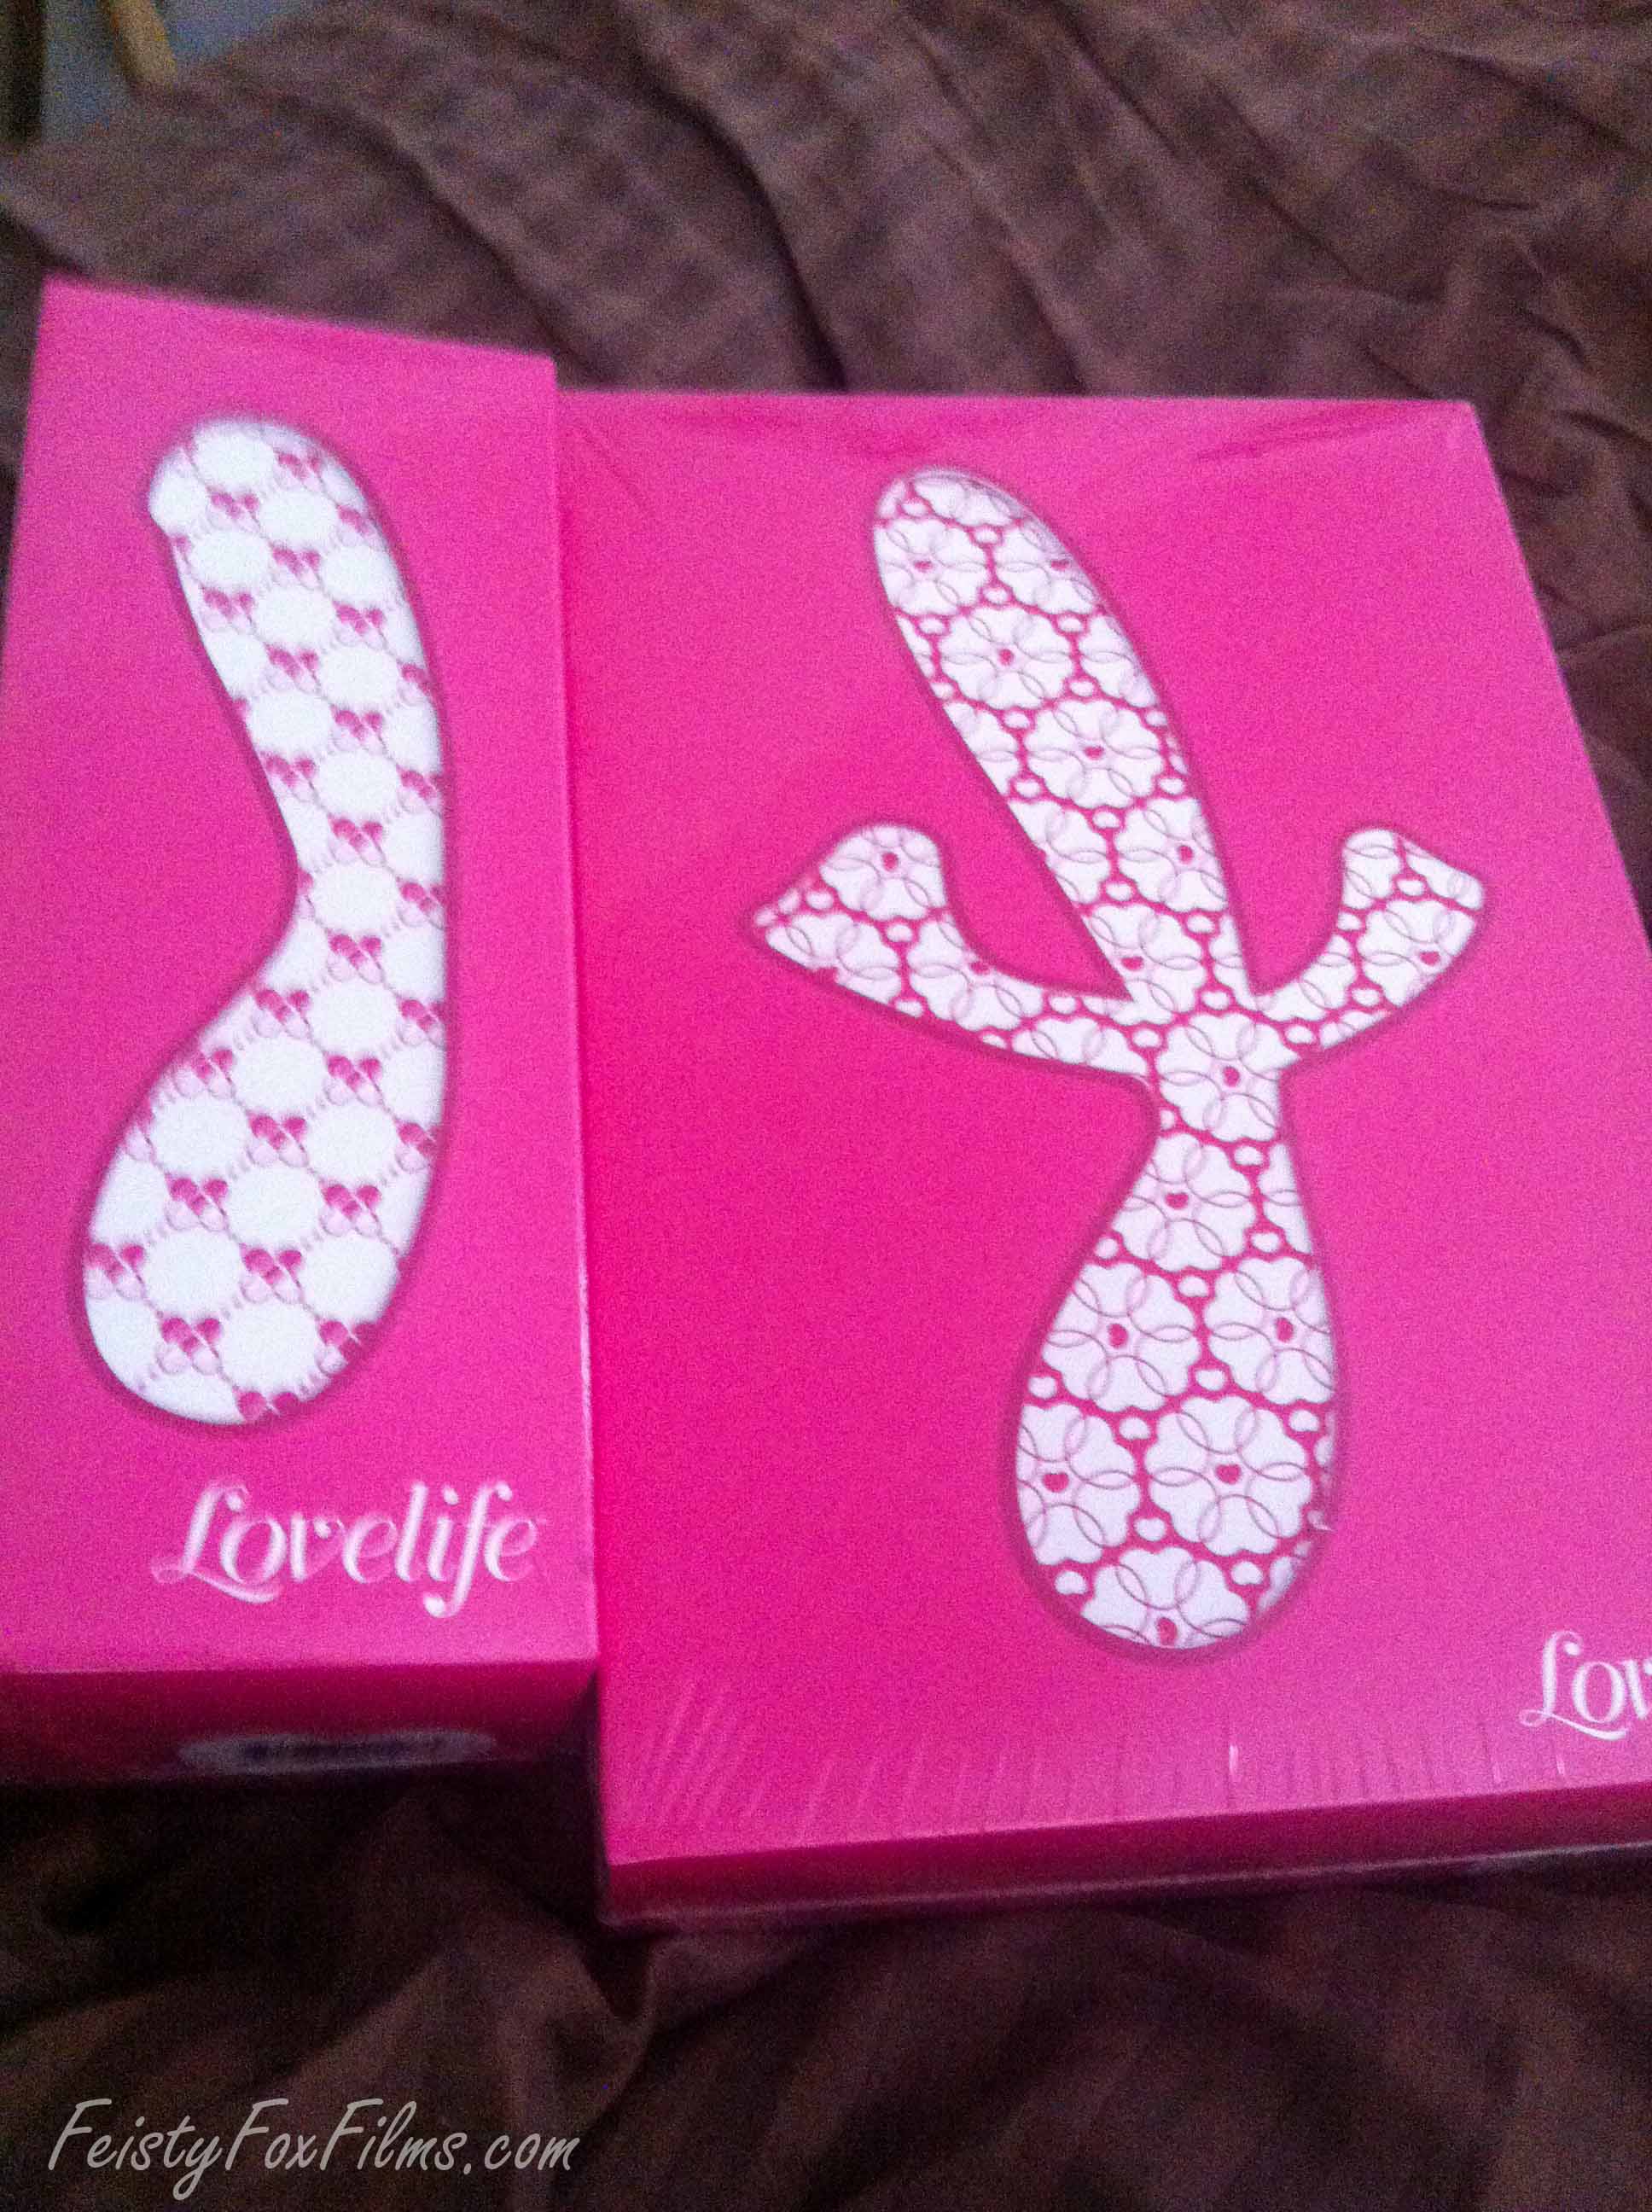 Lovelife's Cuddle and Adventure, boxed